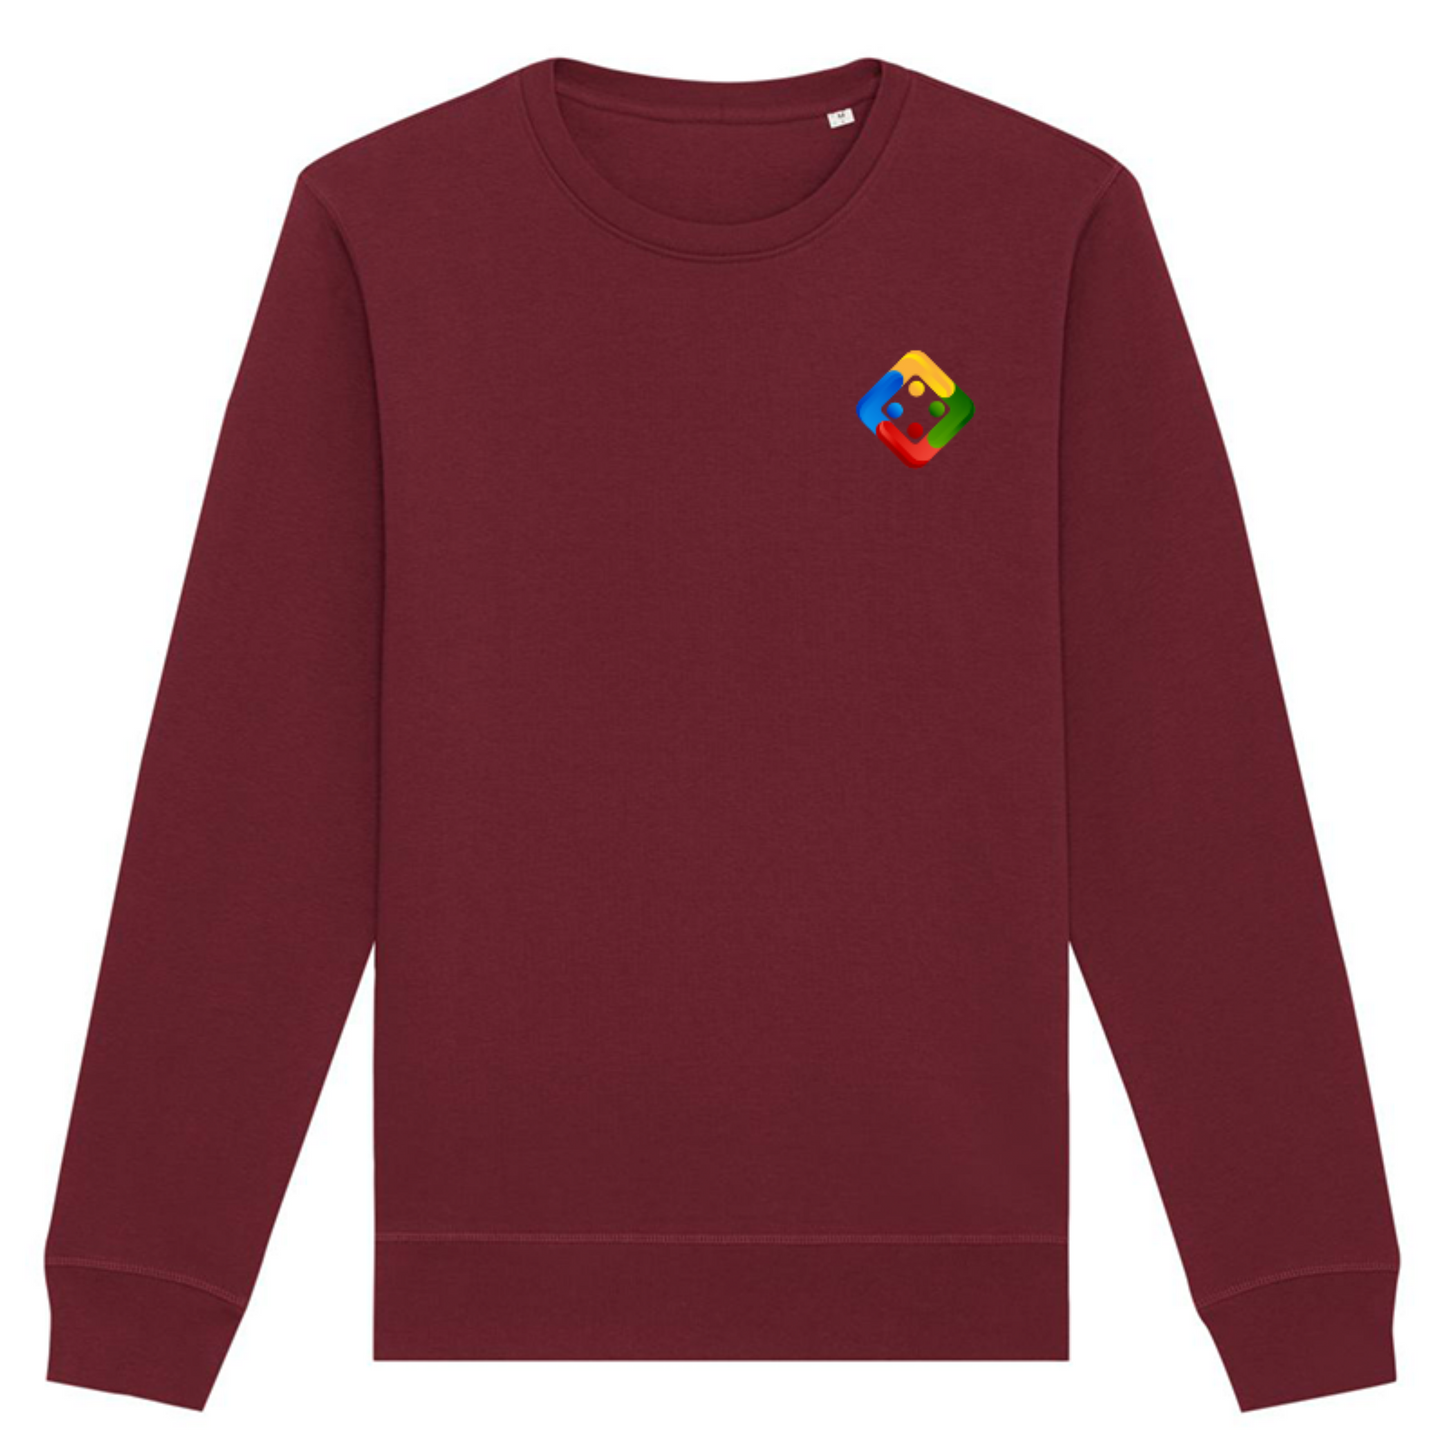 Unisex sweatshirt in dark colours with embroidered Uckers emblem. Available in 10 colours.